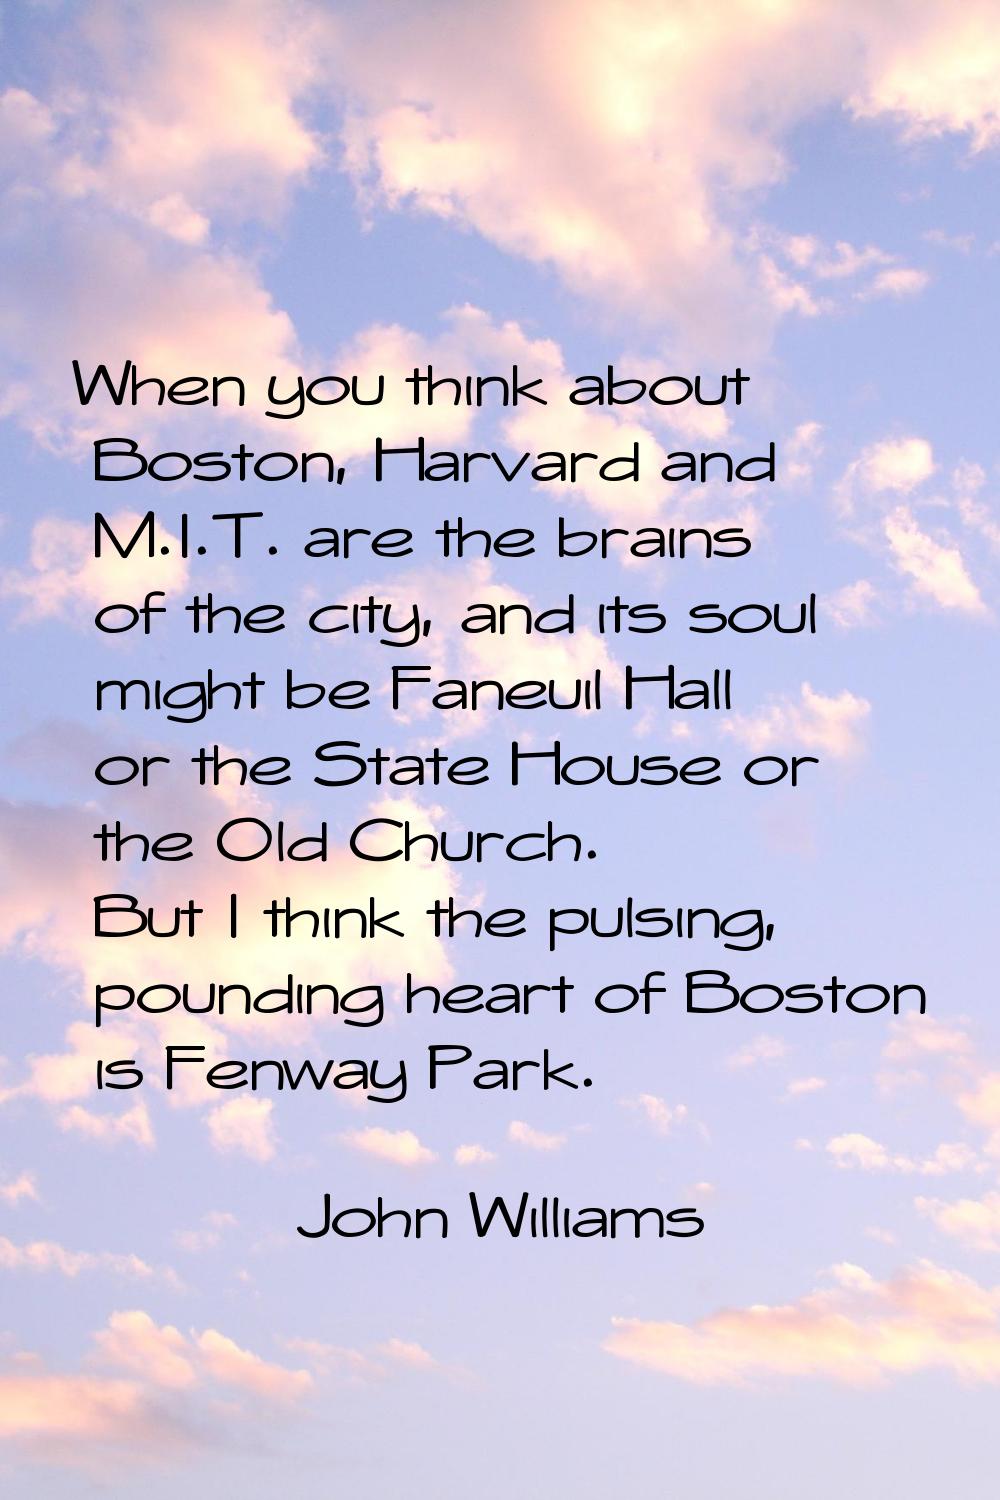 When you think about Boston, Harvard and M.I.T. are the brains of the city, and its soul might be F